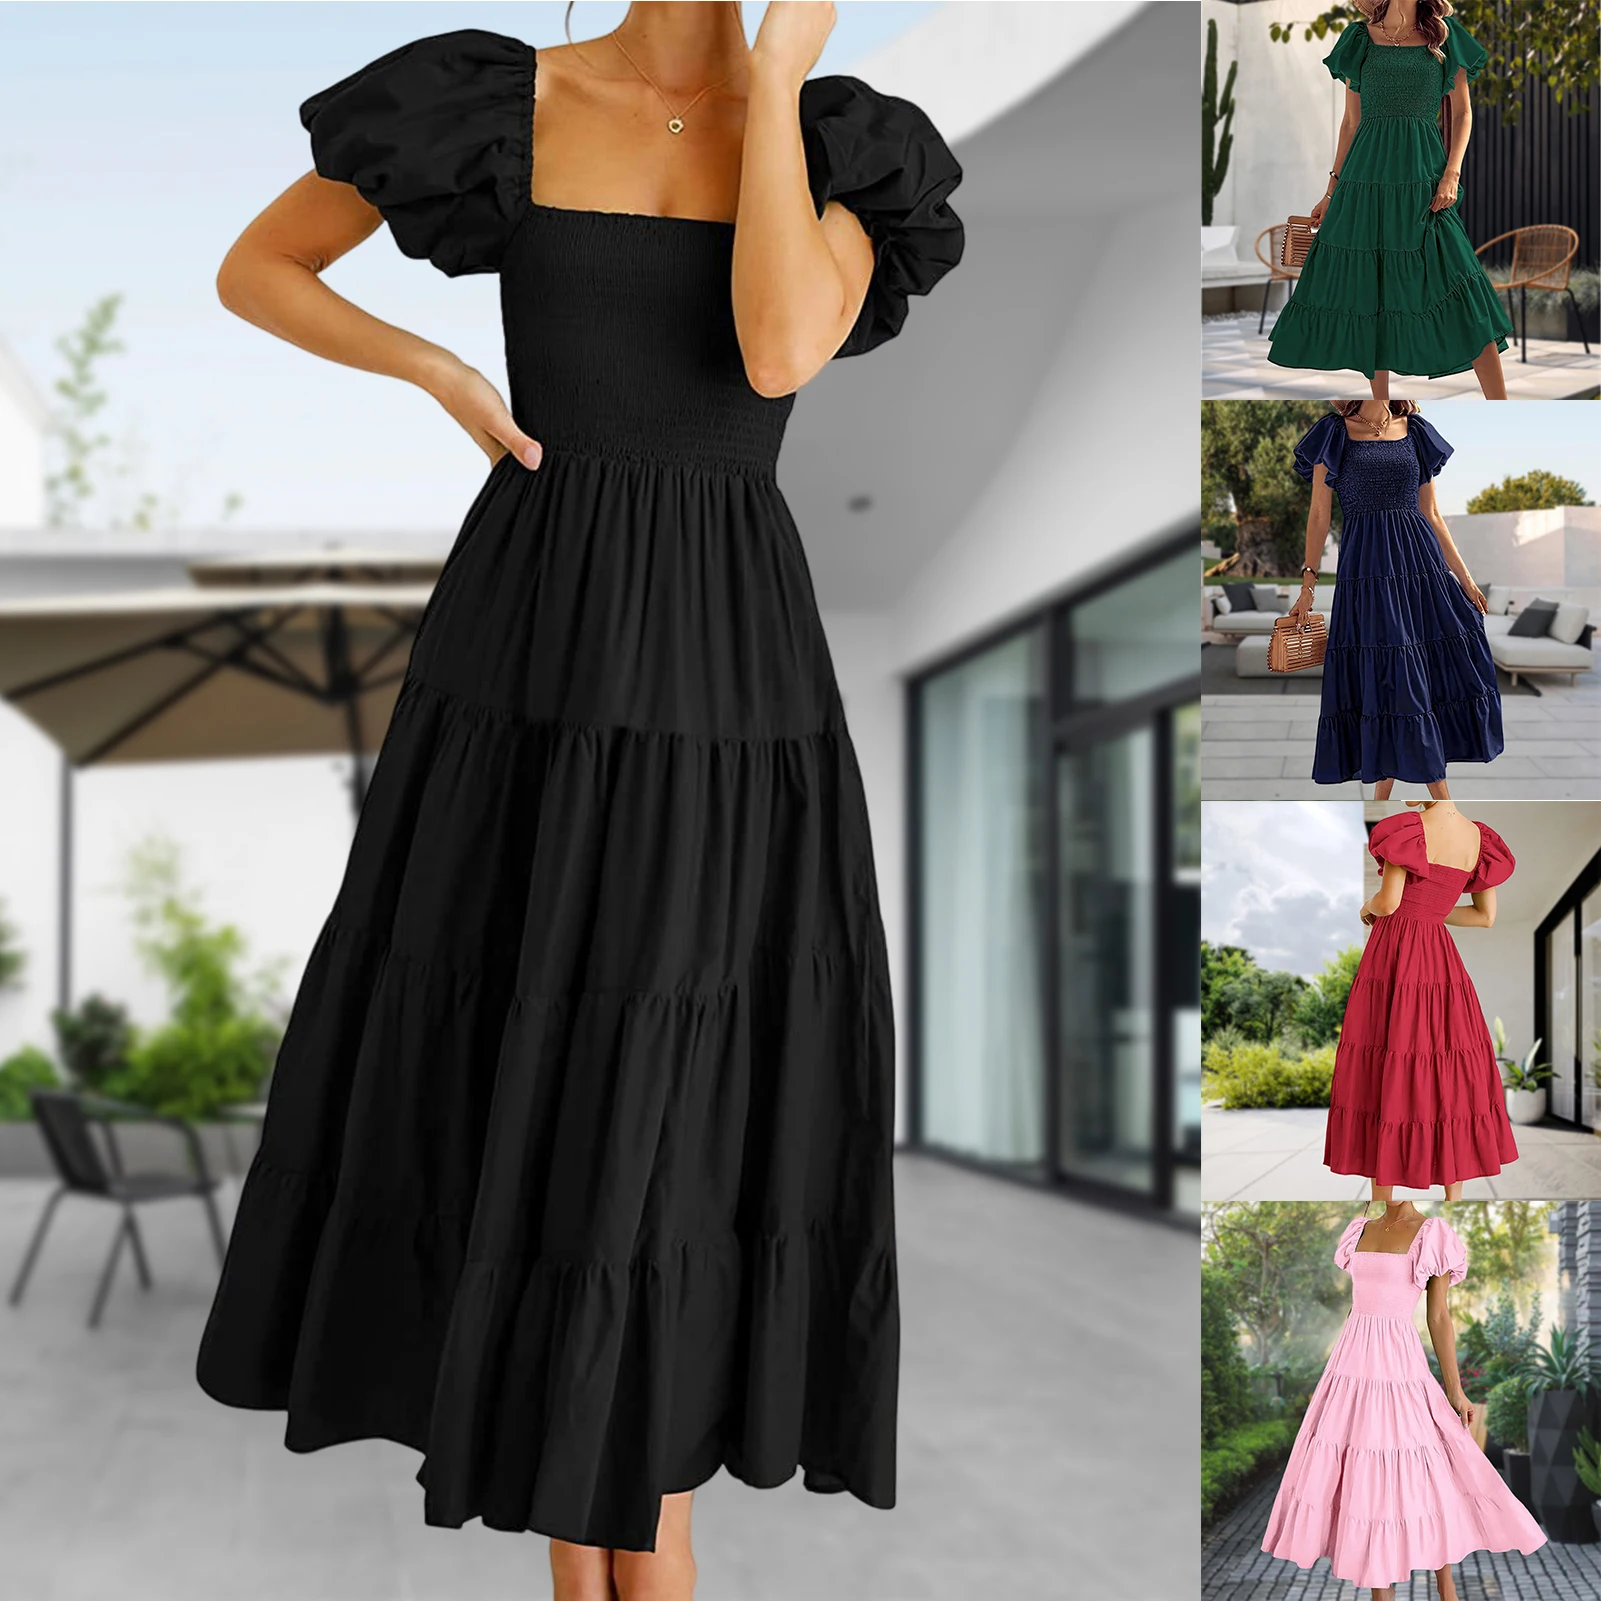 

Women Maxi Dress Short Sleeve Square Neck Party Dresses Puffy Long Bodycon Dress Smocked Tiered Solid Color for Holiday Shopping